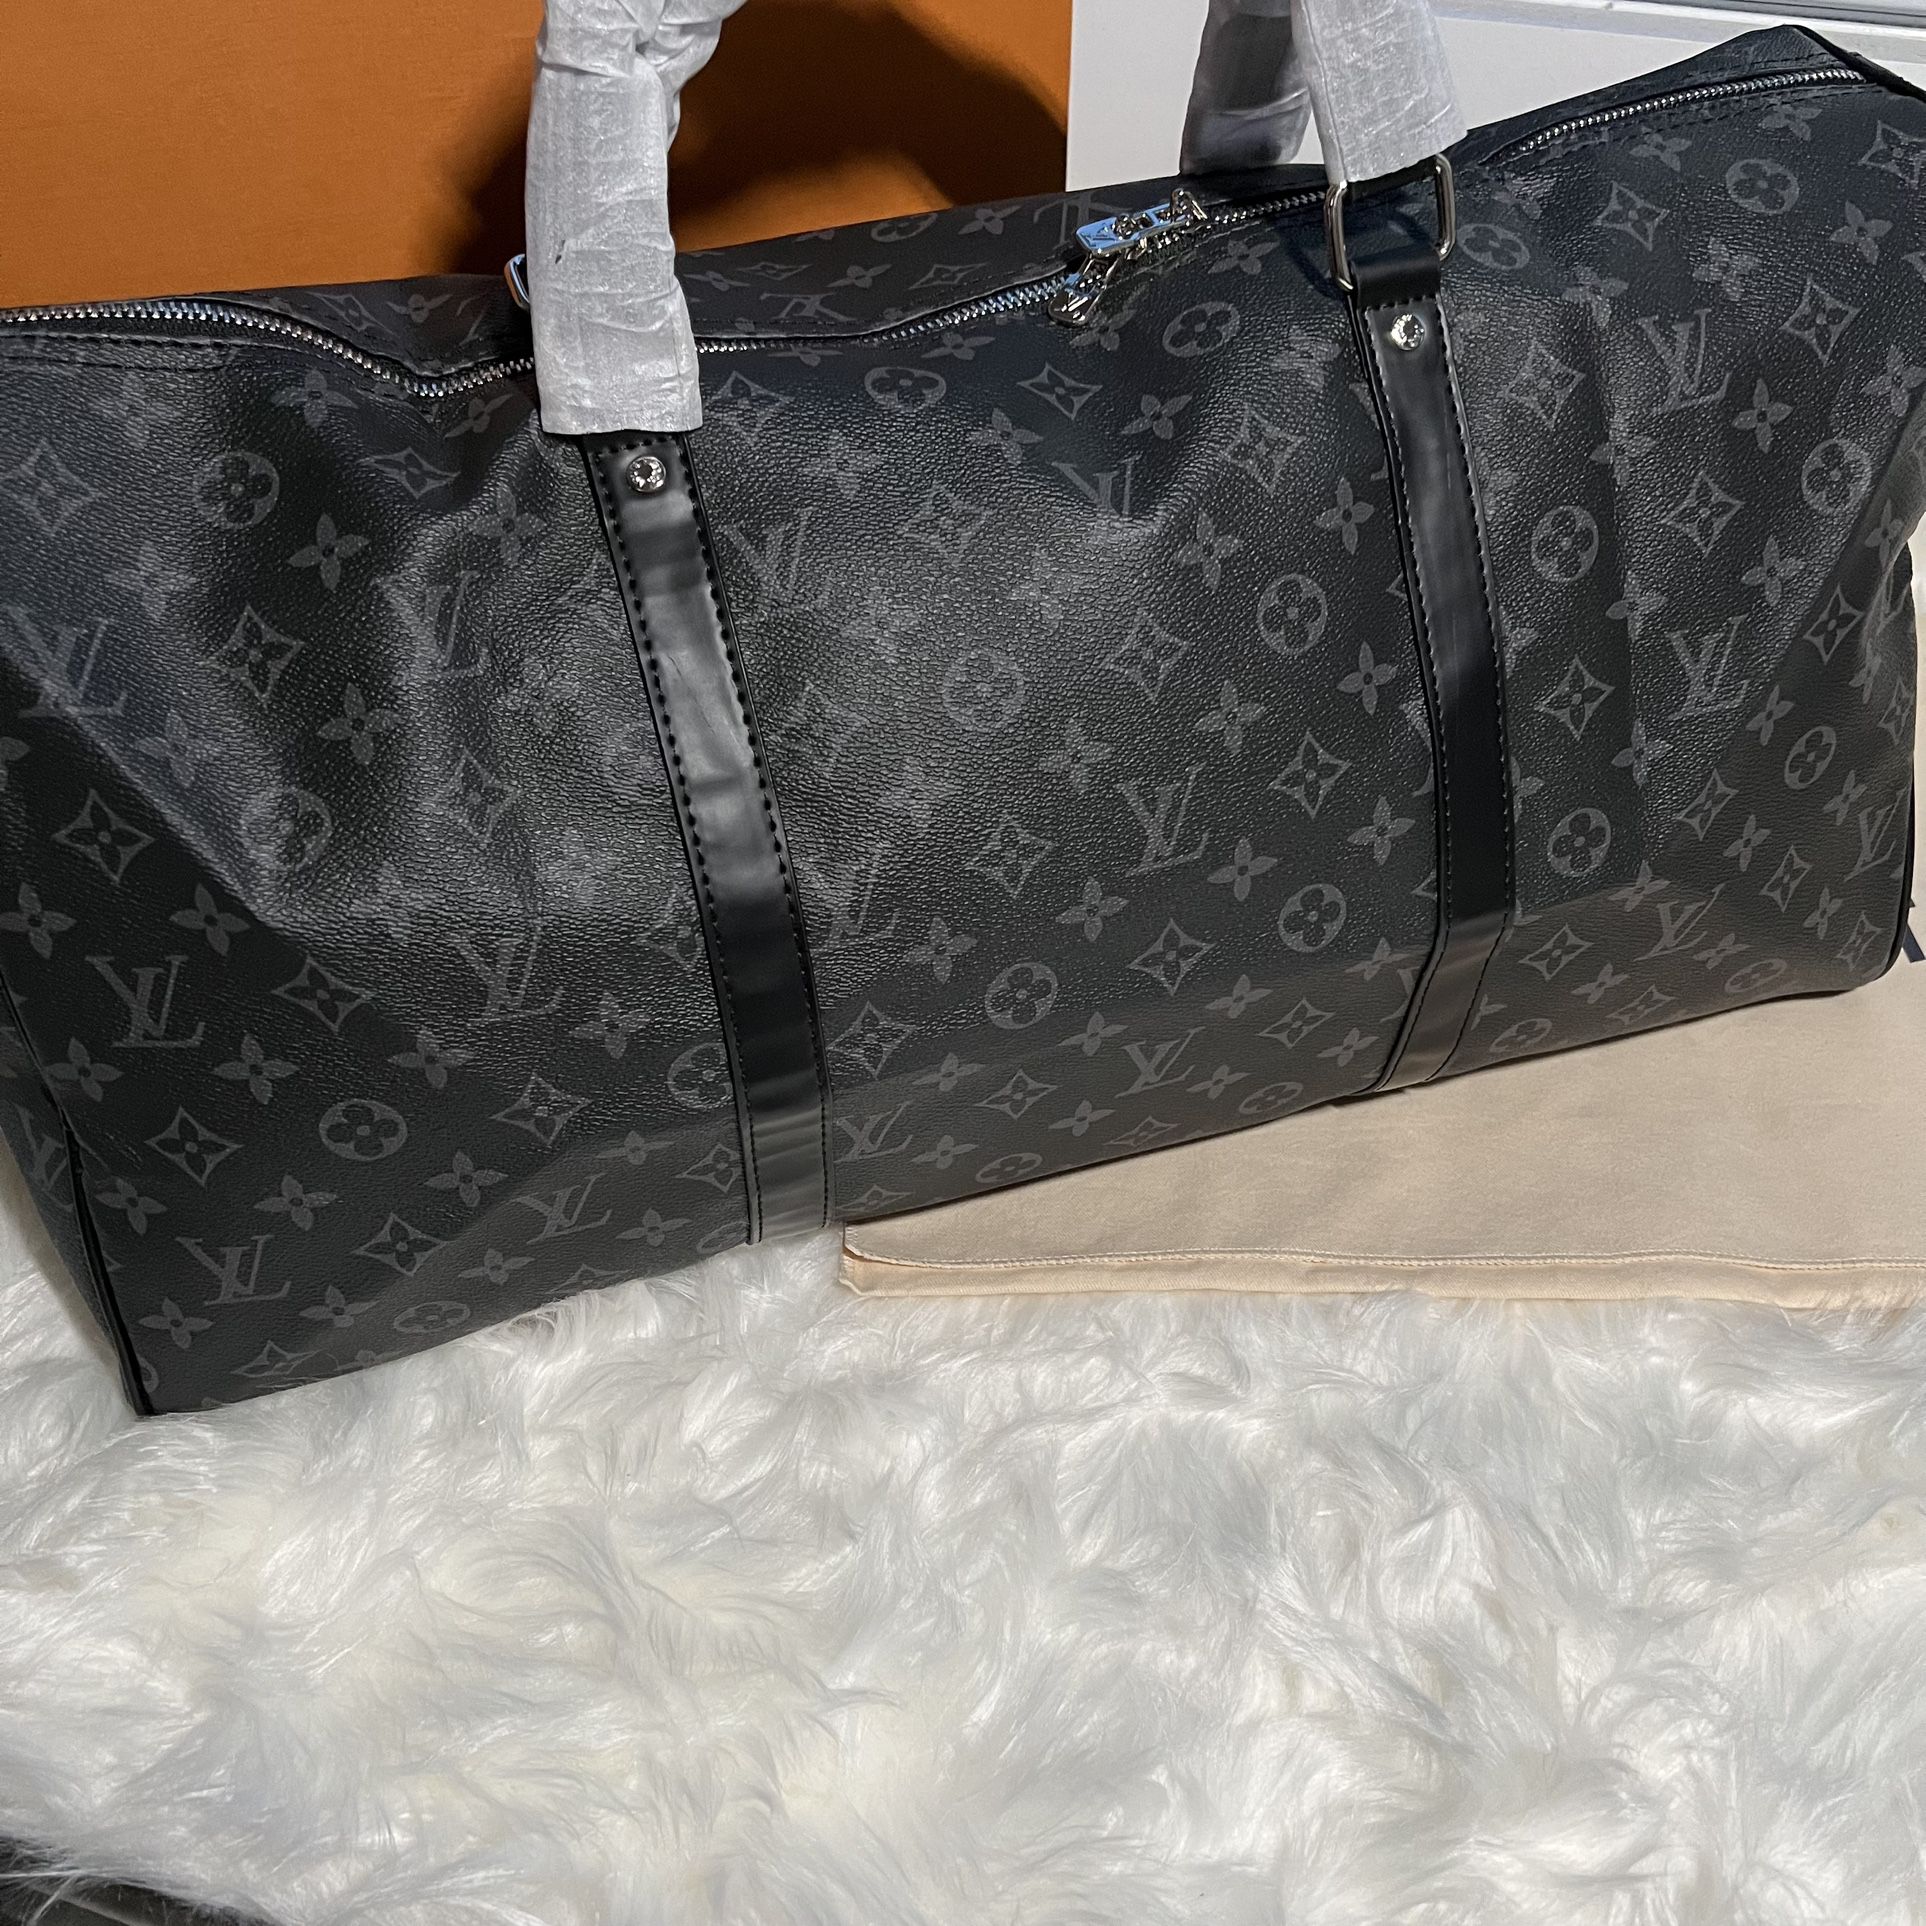 Louis Vuitton Small Duffle Bag for Sale in Ind Crk Vlg, FL - OfferUp